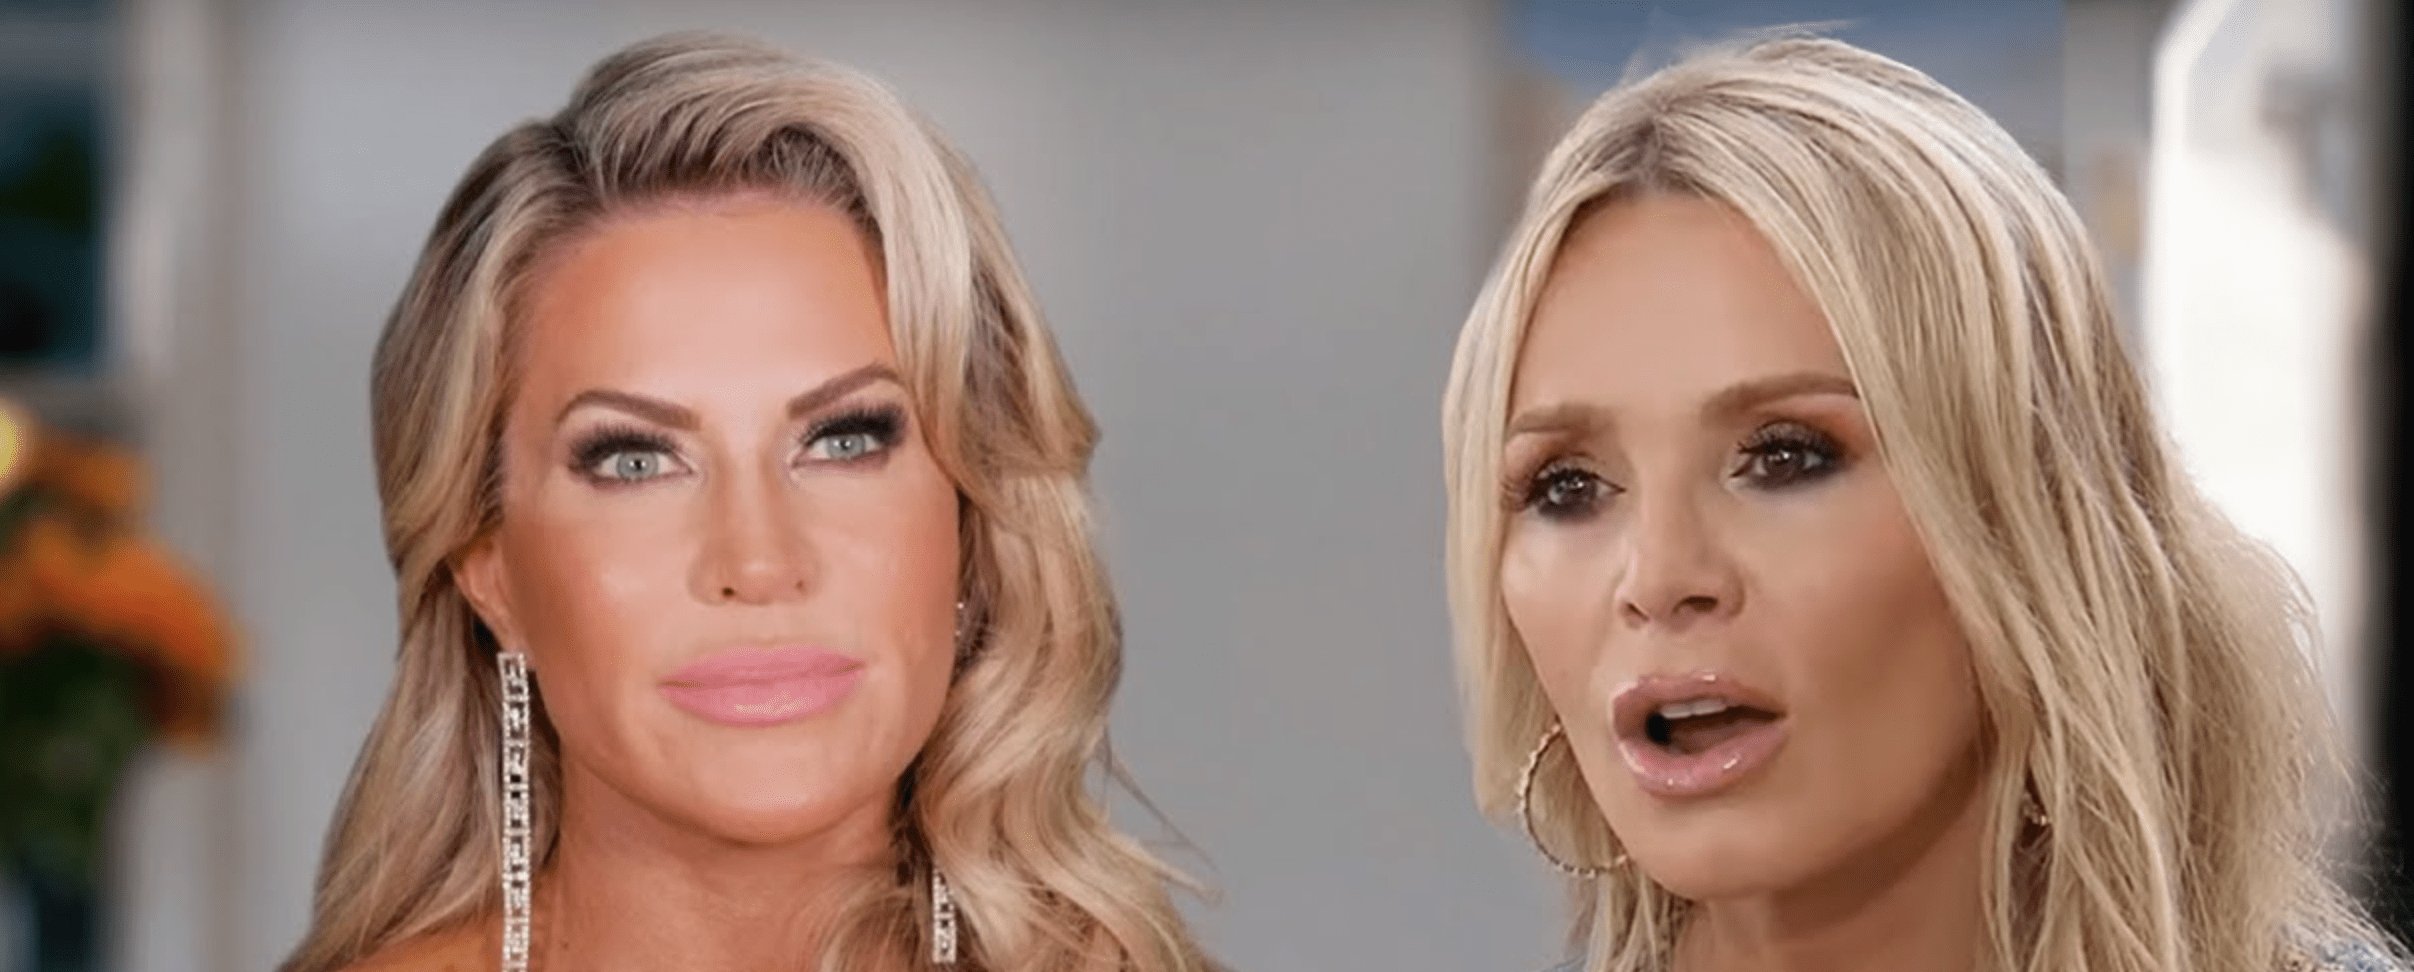 Jennifer Pedranti CLAPS BACK at Tamra Judge for Calling Her Fiancé “Disgusting”